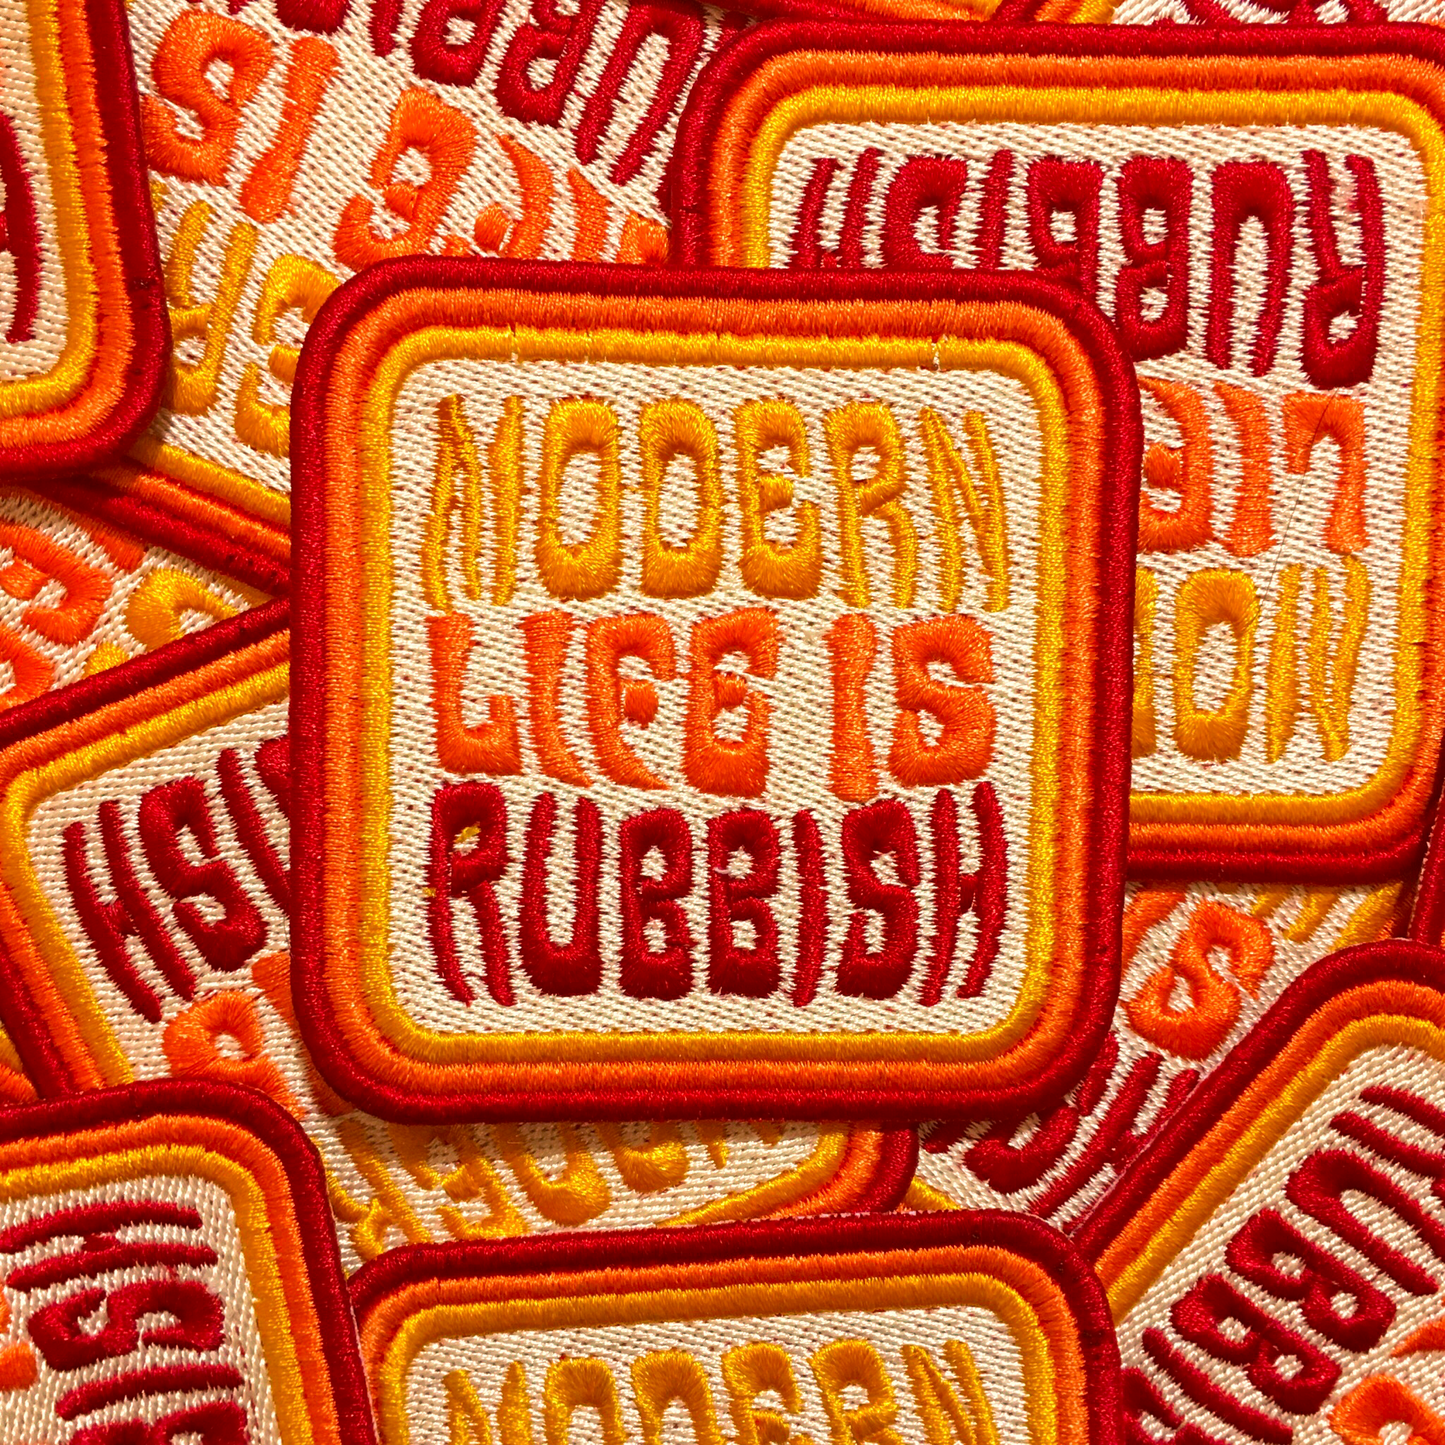 The Modern Life Patch